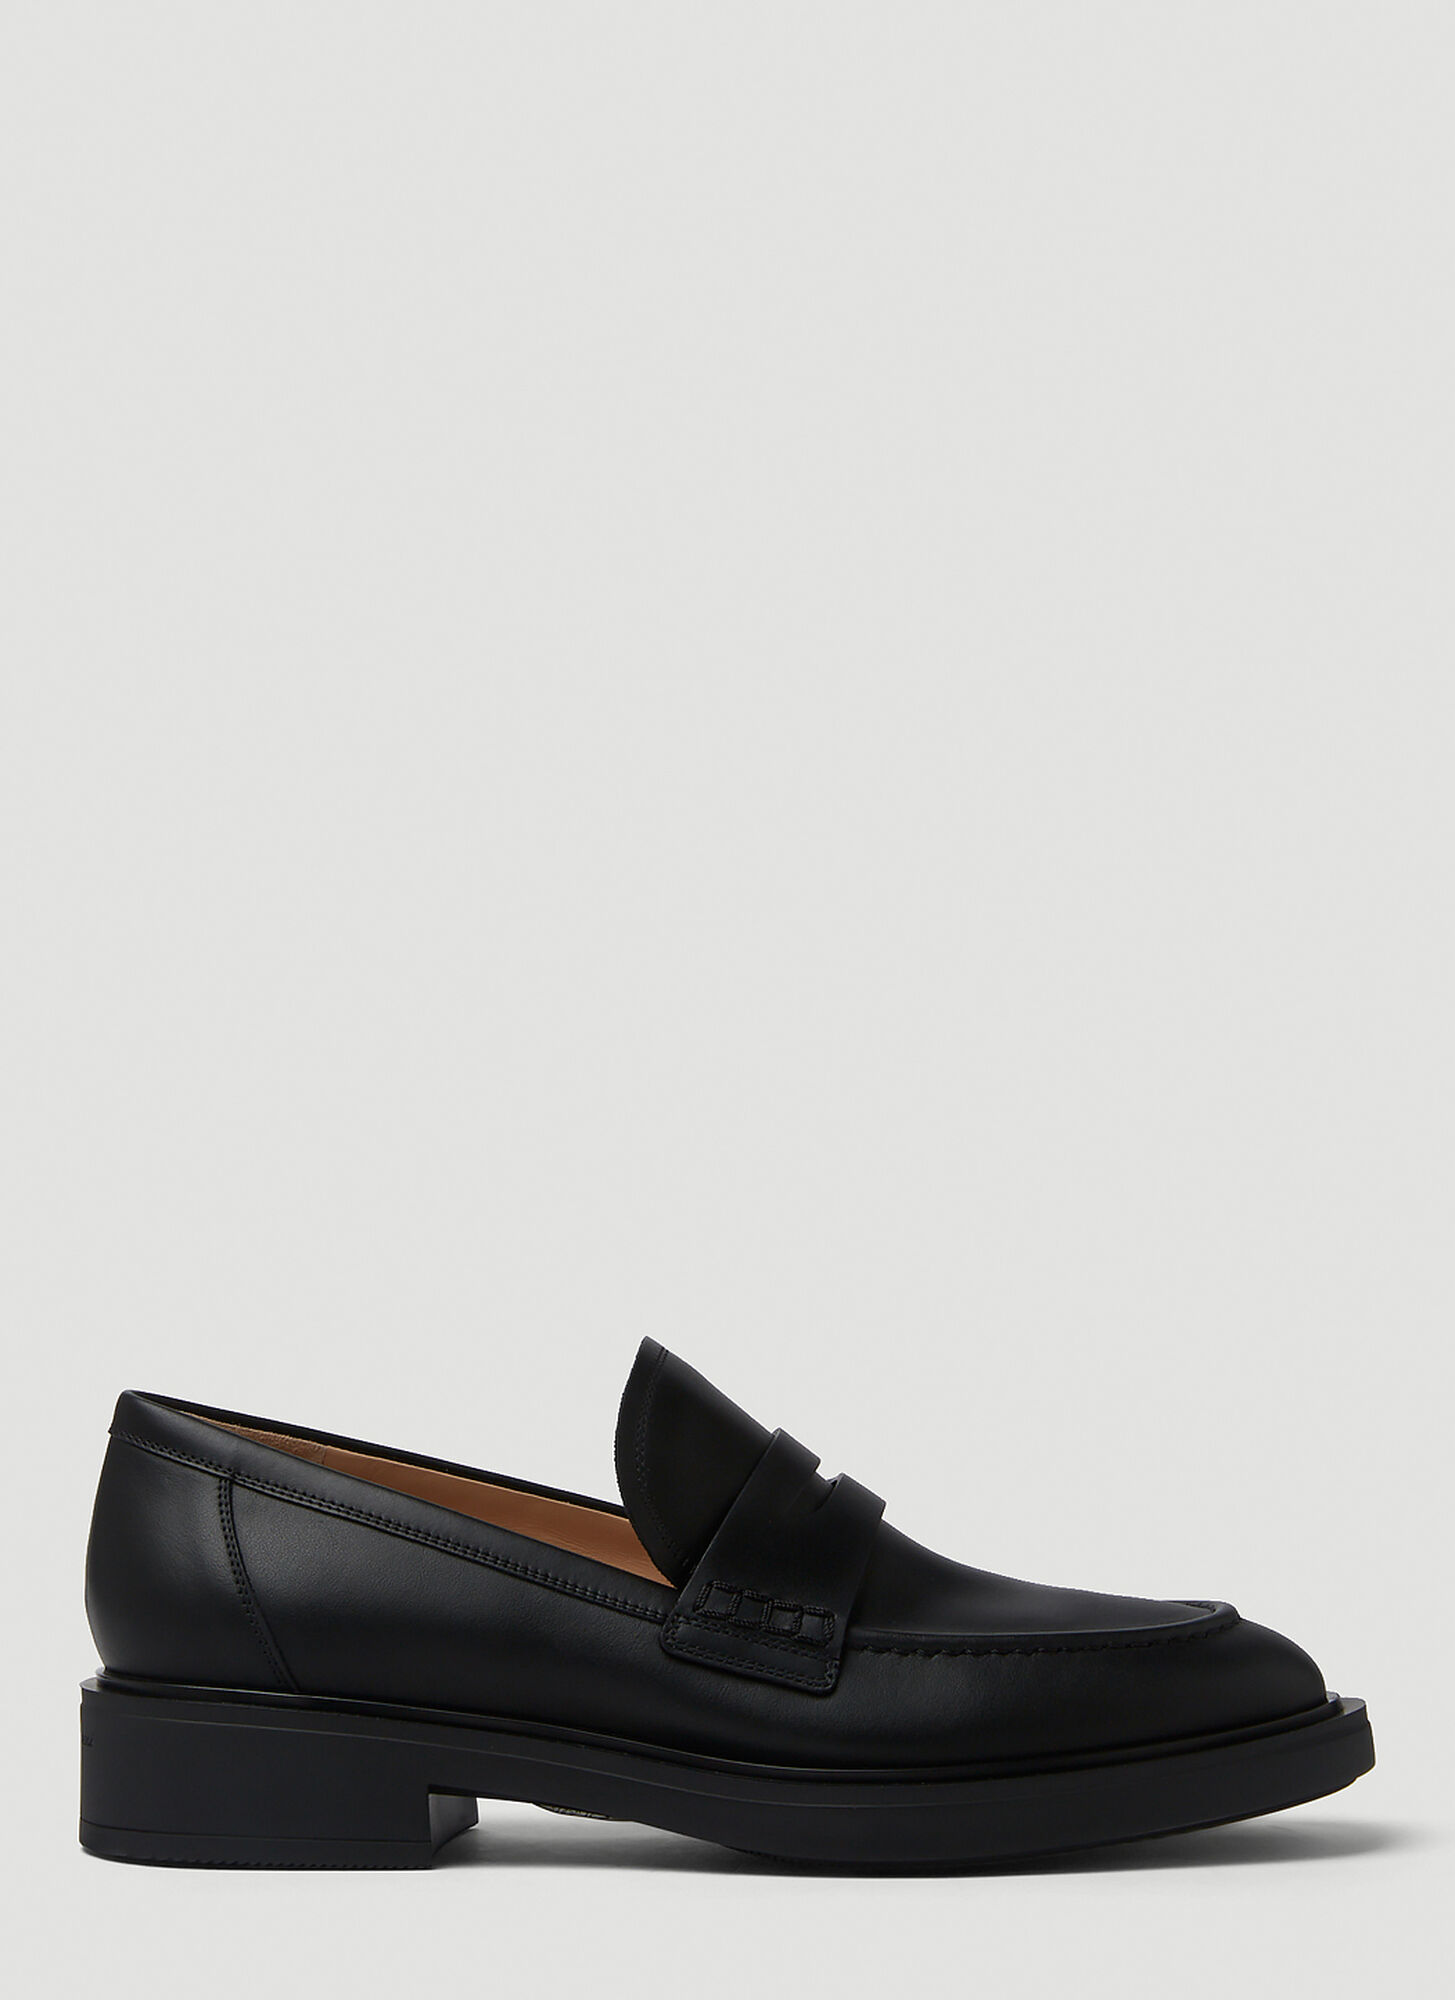 GIANVITO ROSSI HARRIS PENNY LOAFERS